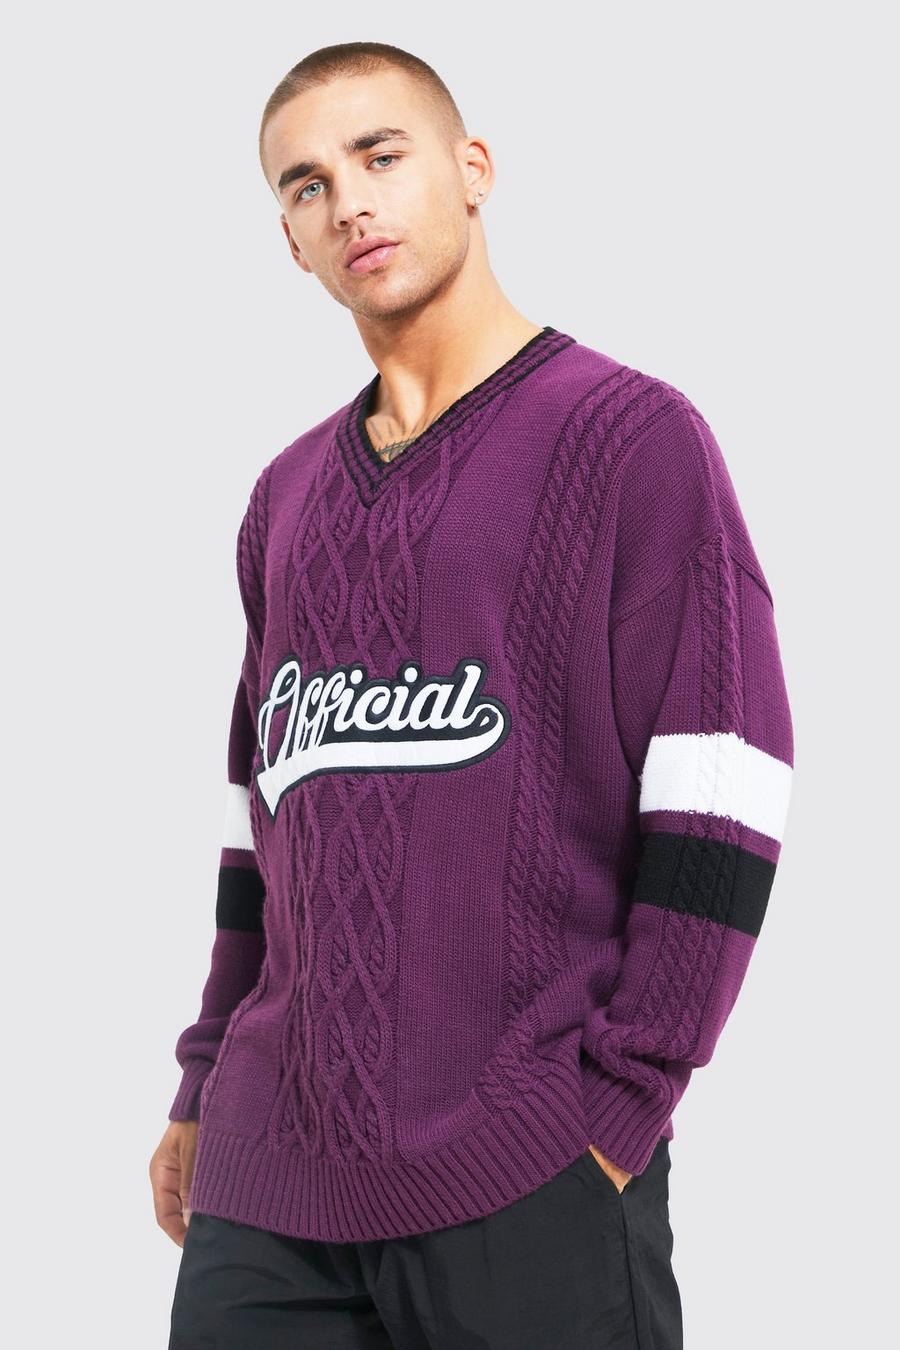 Official Zopfmuster-Pullover, Purple